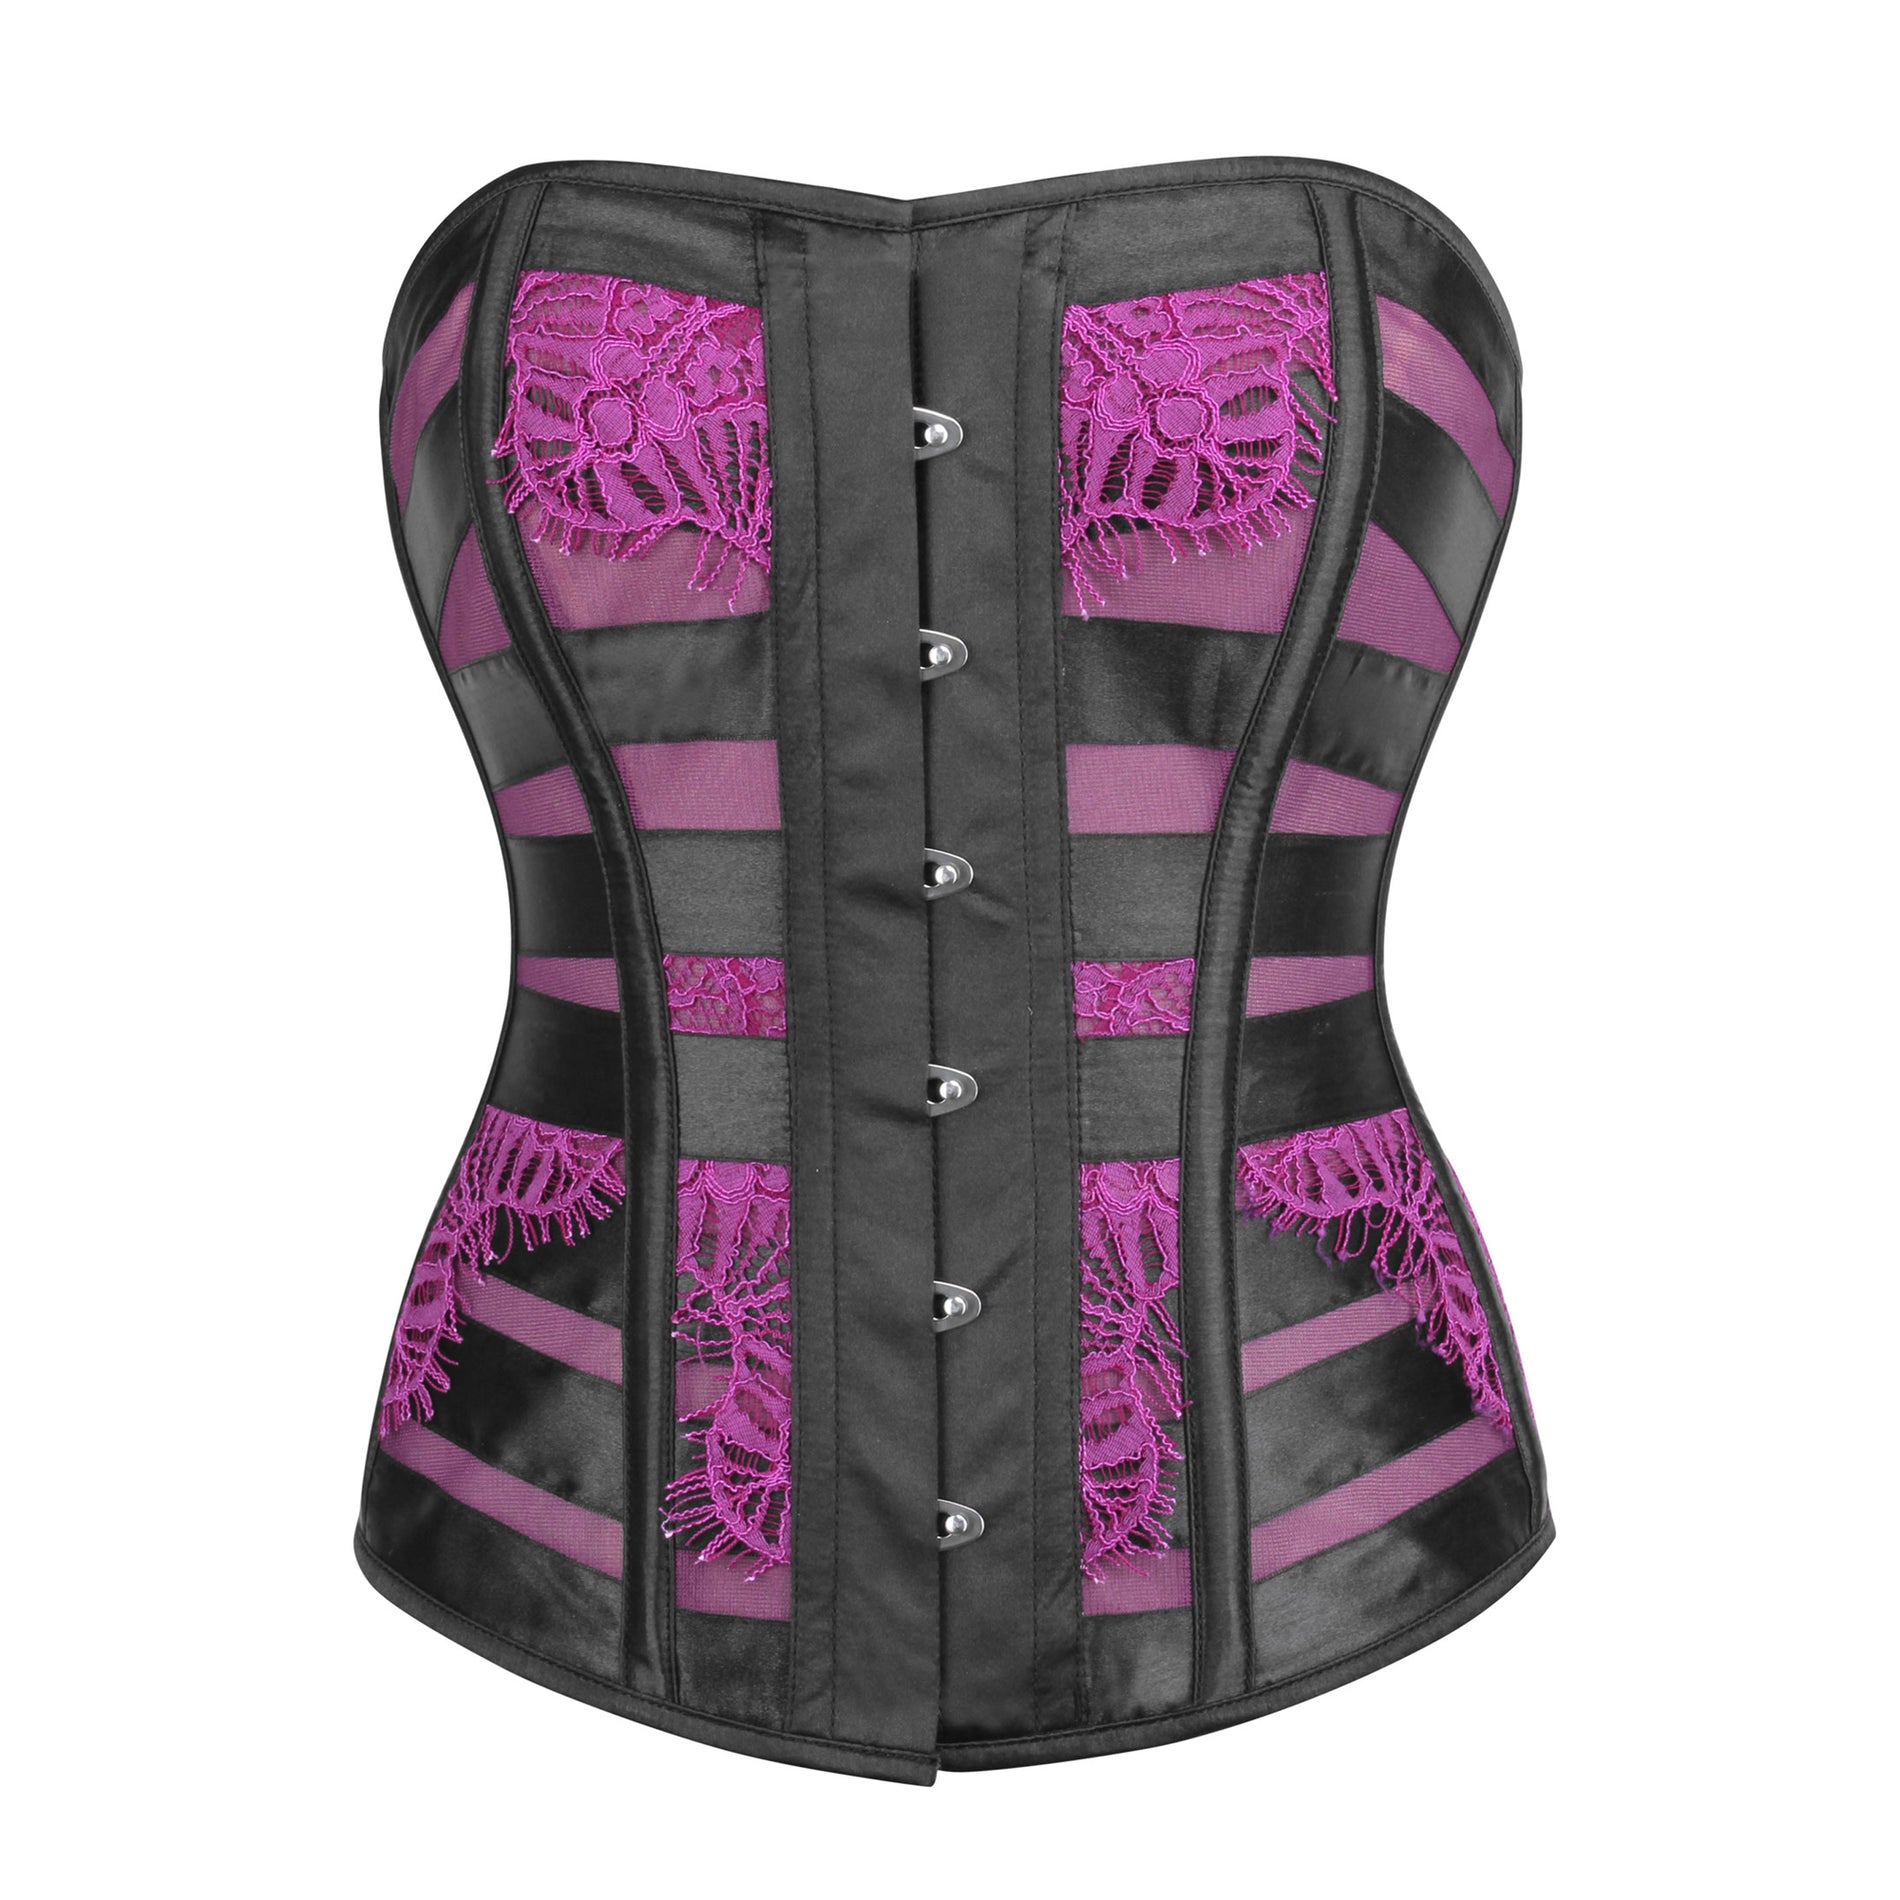 The Corset Story guide on how to care for your corset